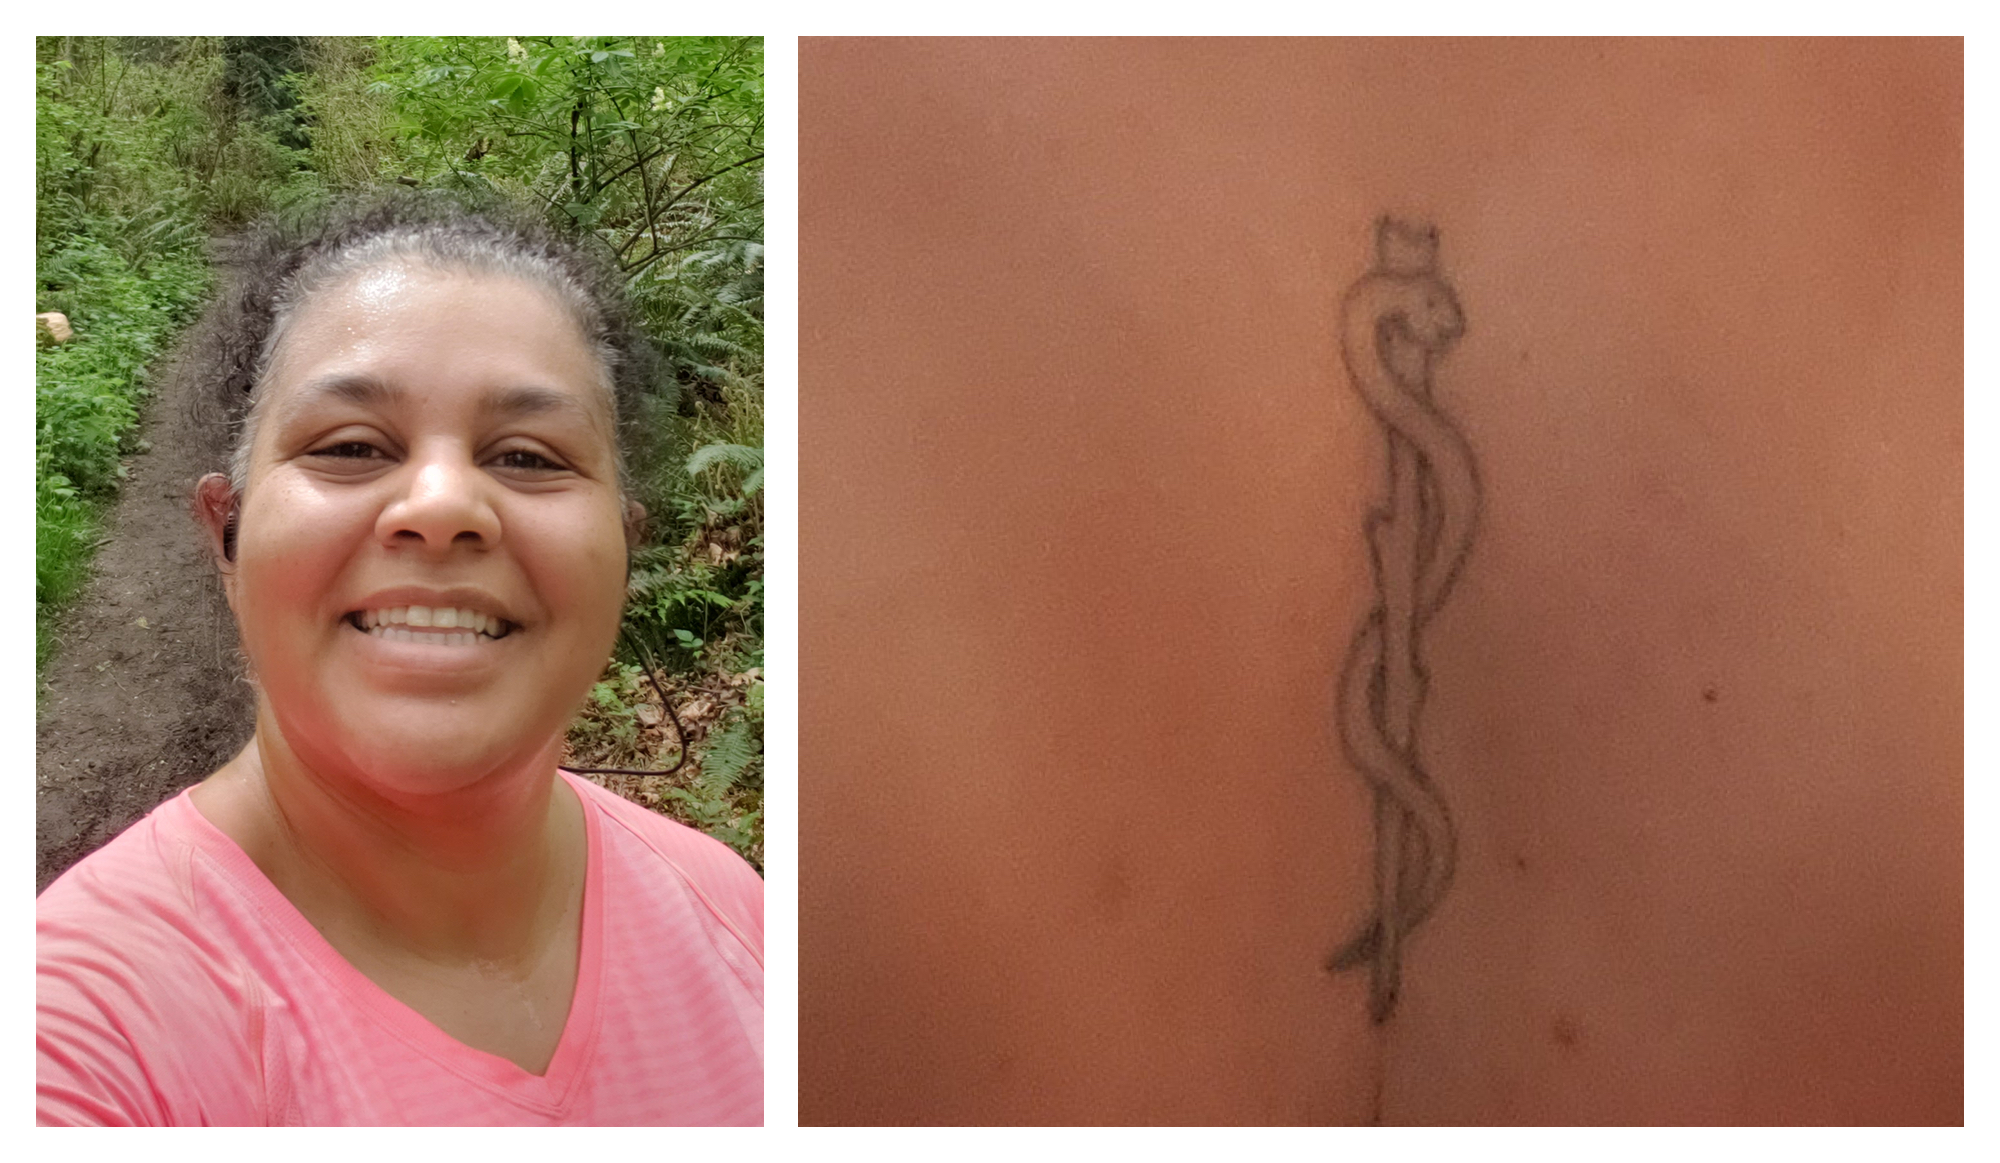 Photo collage of Samara Peters and her tattoo of the Rod of Asclepius